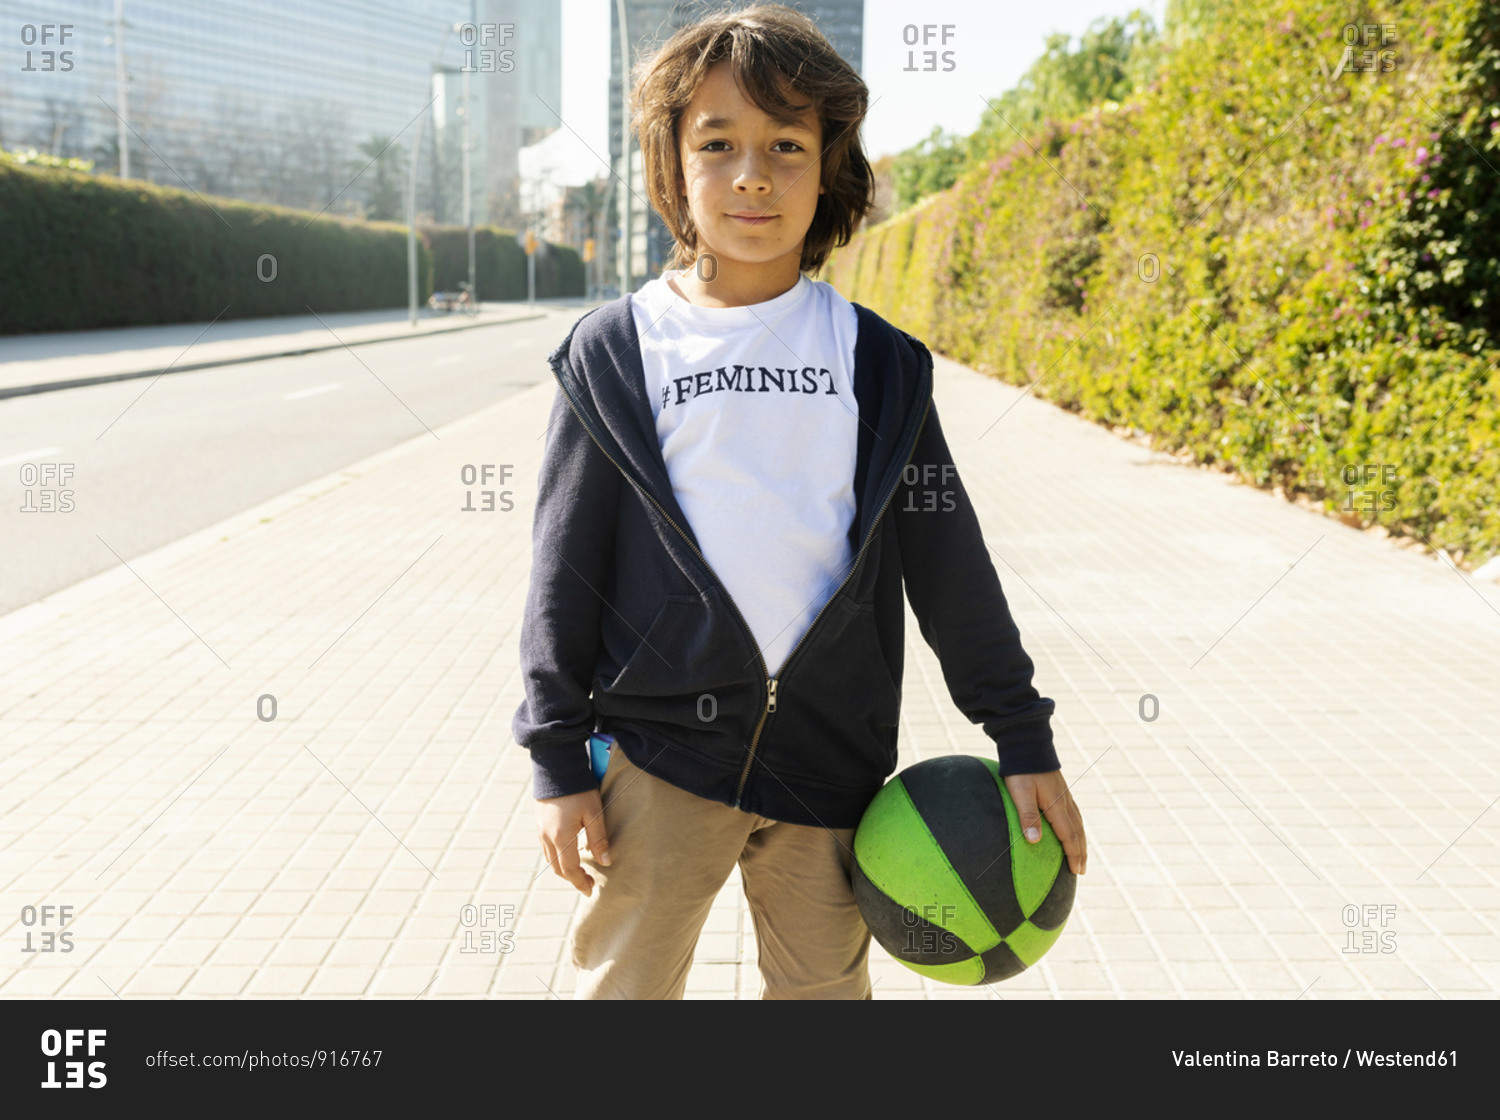 Little boy standing in the street with print on t-shirt- saying Feminist- holding ball